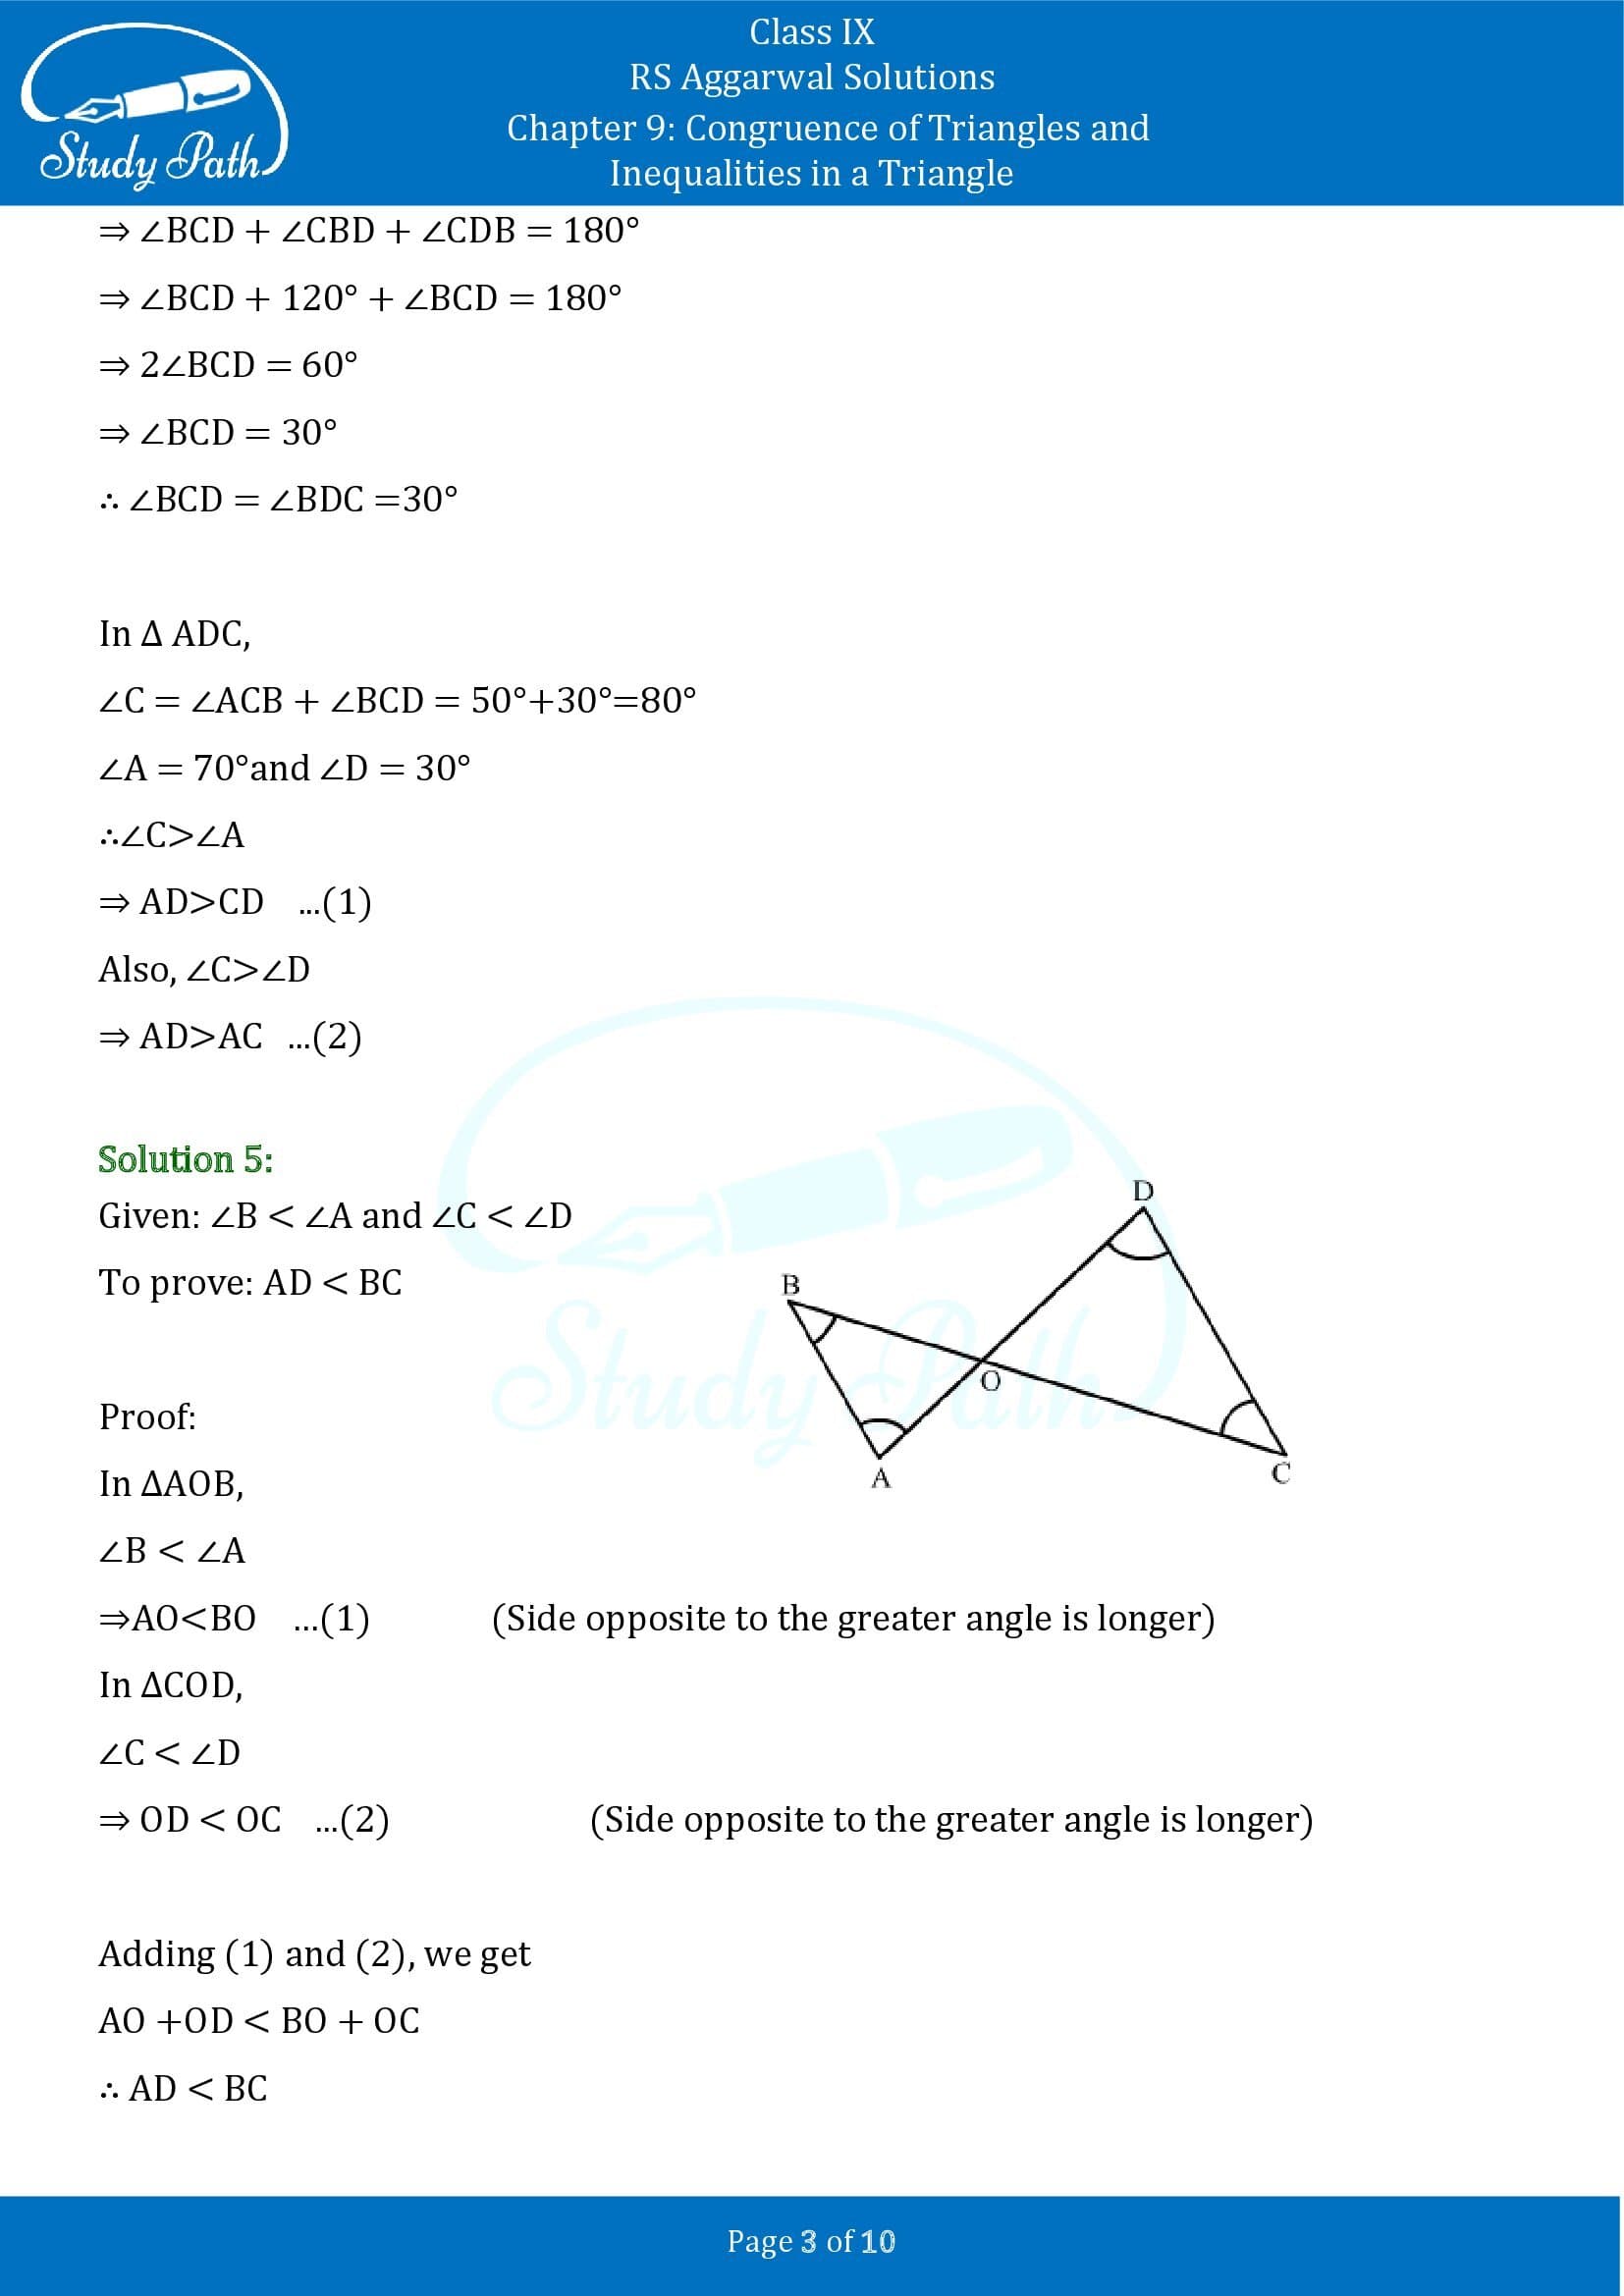 RS Aggarwal Solutions Class 9 Chapter 9 Congruence of Triangles and Inequalities in a Triangle Exercise 9B 0003